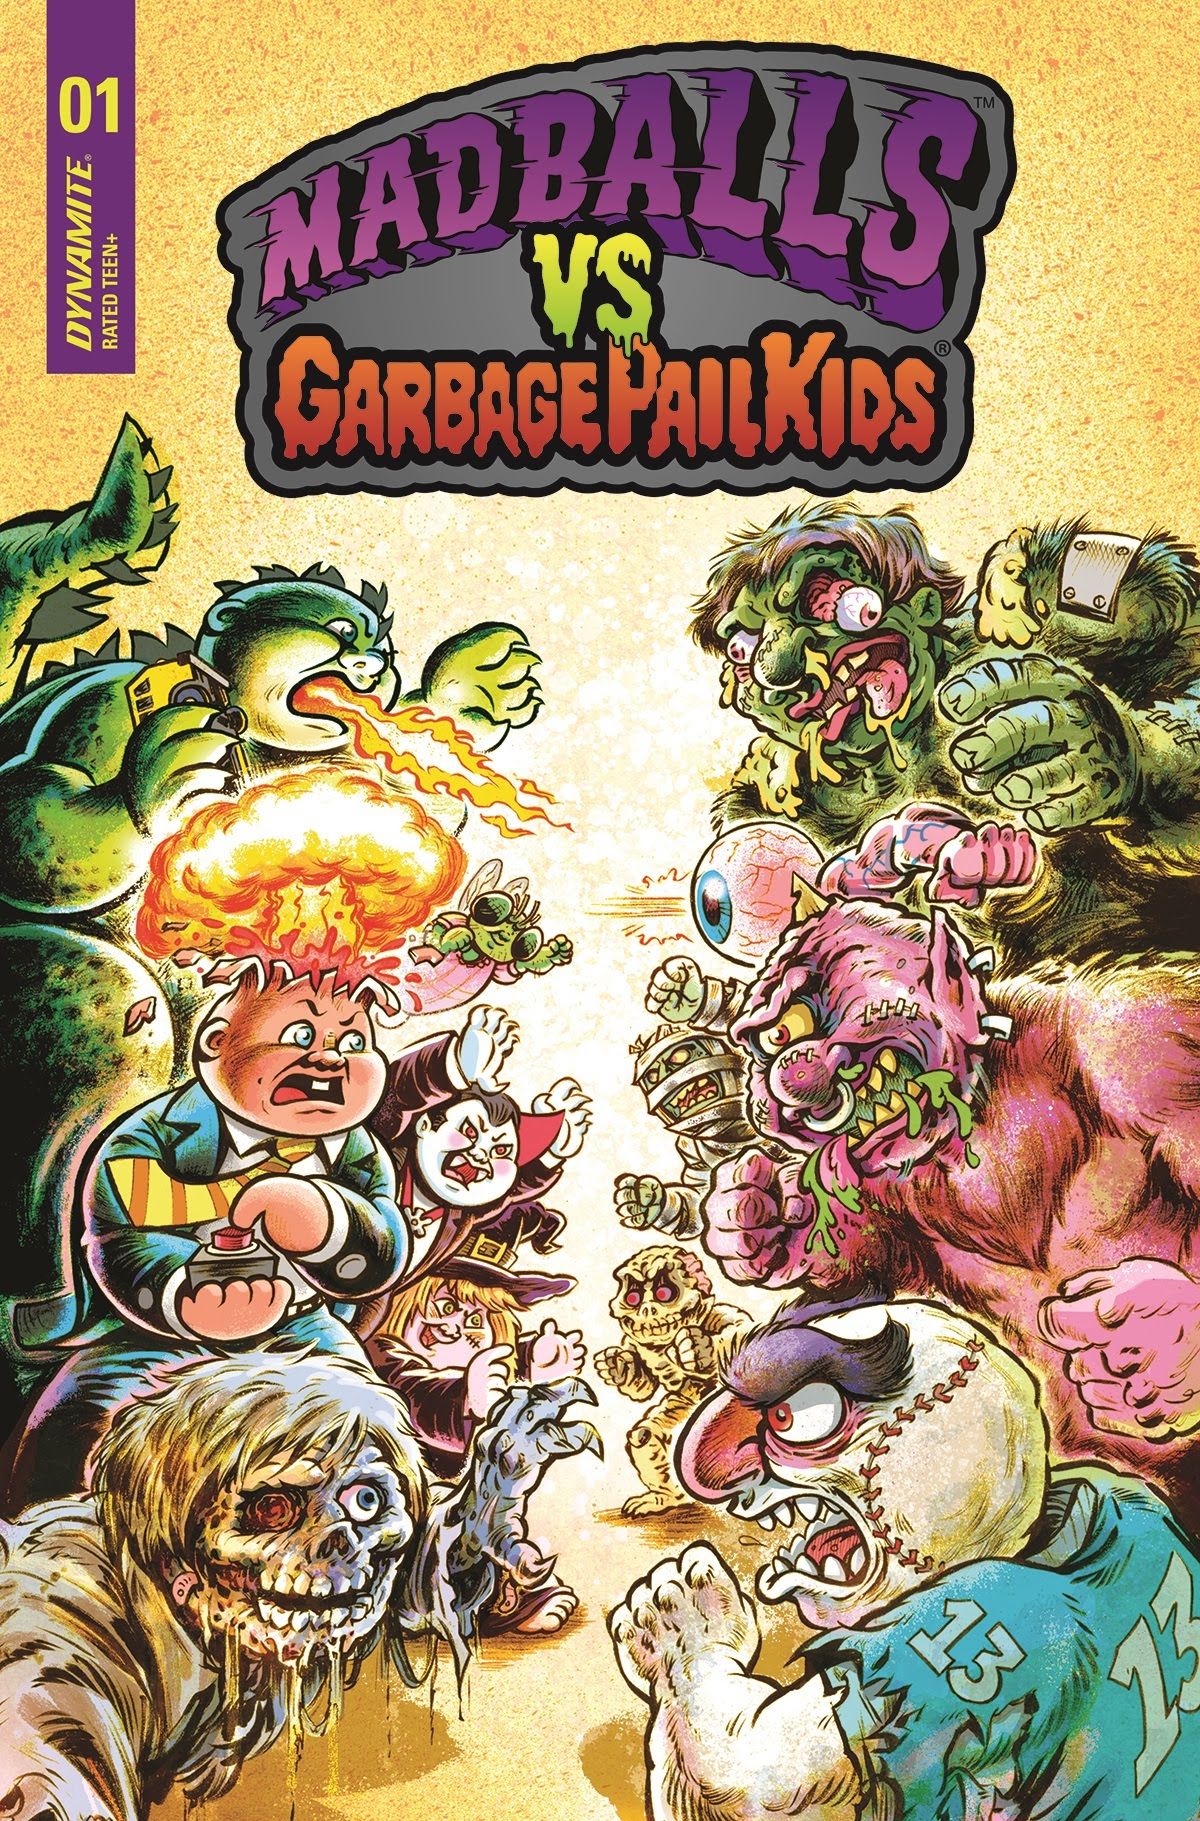 80s Icons Madballs and Garbage Pail Kids Go to War in New Crossover Series